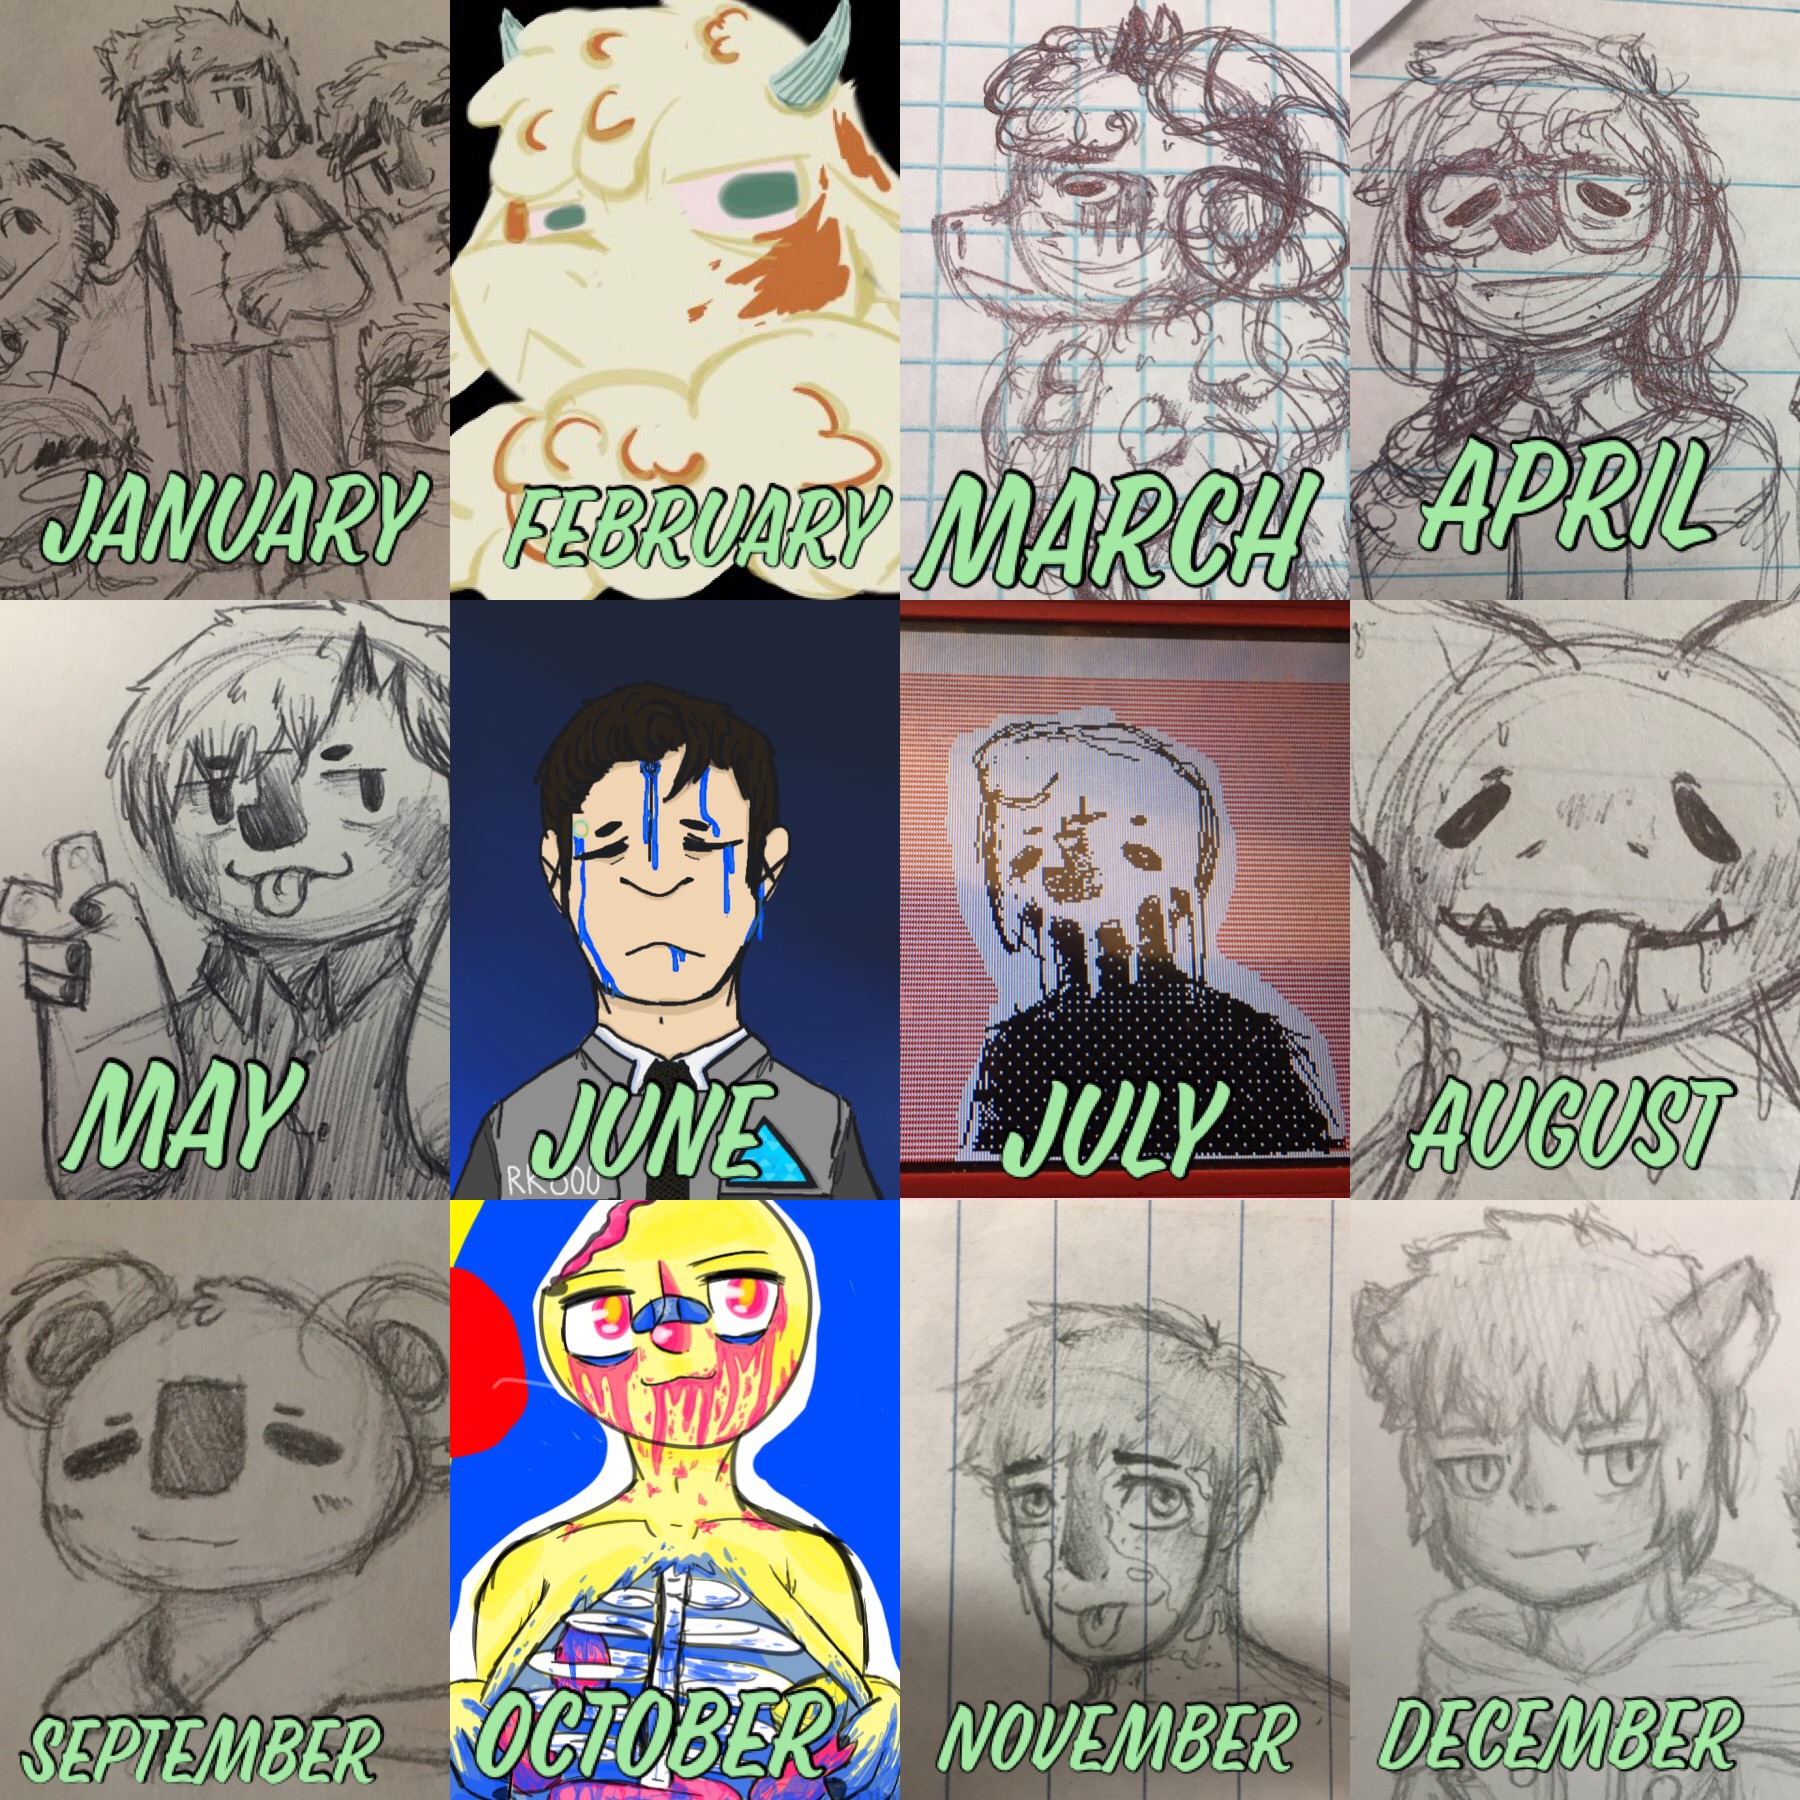 Ew, I’ve just made my art look more anime over this year